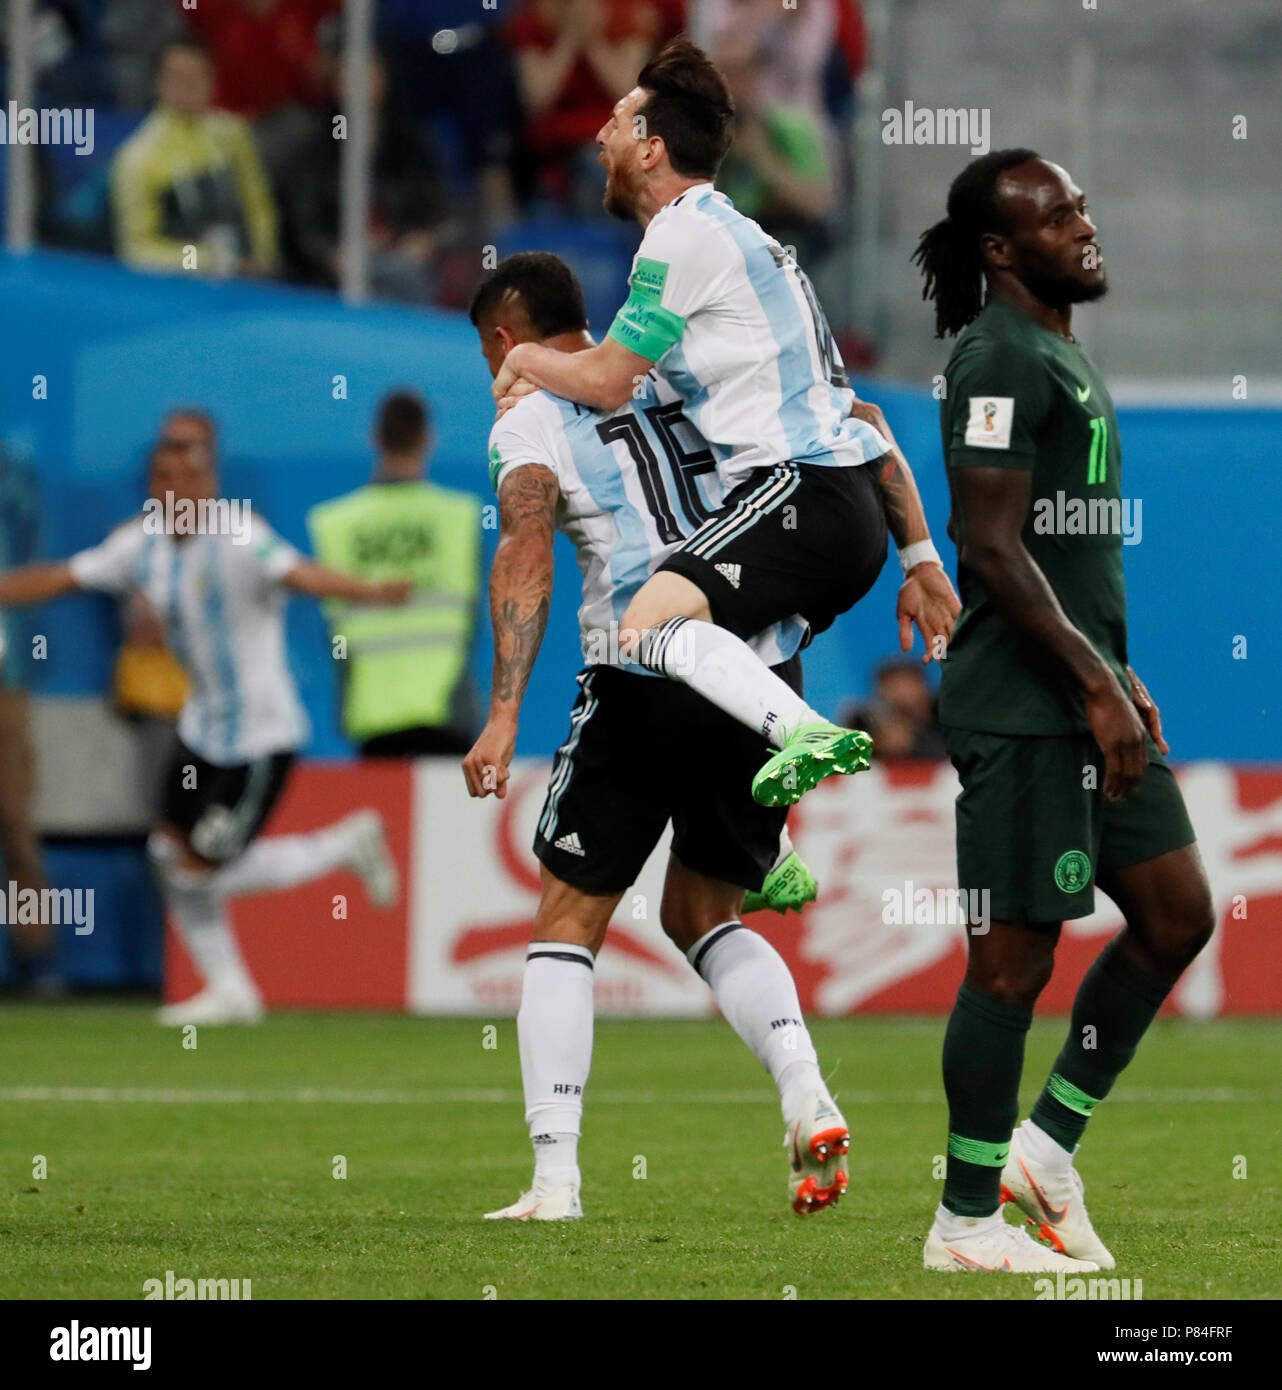 SAINT PETERSBURG, RUSSIA - JUNE 26: Marcos Rojo (C) of Argentina national team celebrates his goal with Lionel Messi (R) during the 2018 FIFA World Cup Russia group D match between Nigeria and Argentina at Saint Petersburg Stadium on June 26, 2018 in Saint Petersburg, Russia. (MB Media) Stock Photo